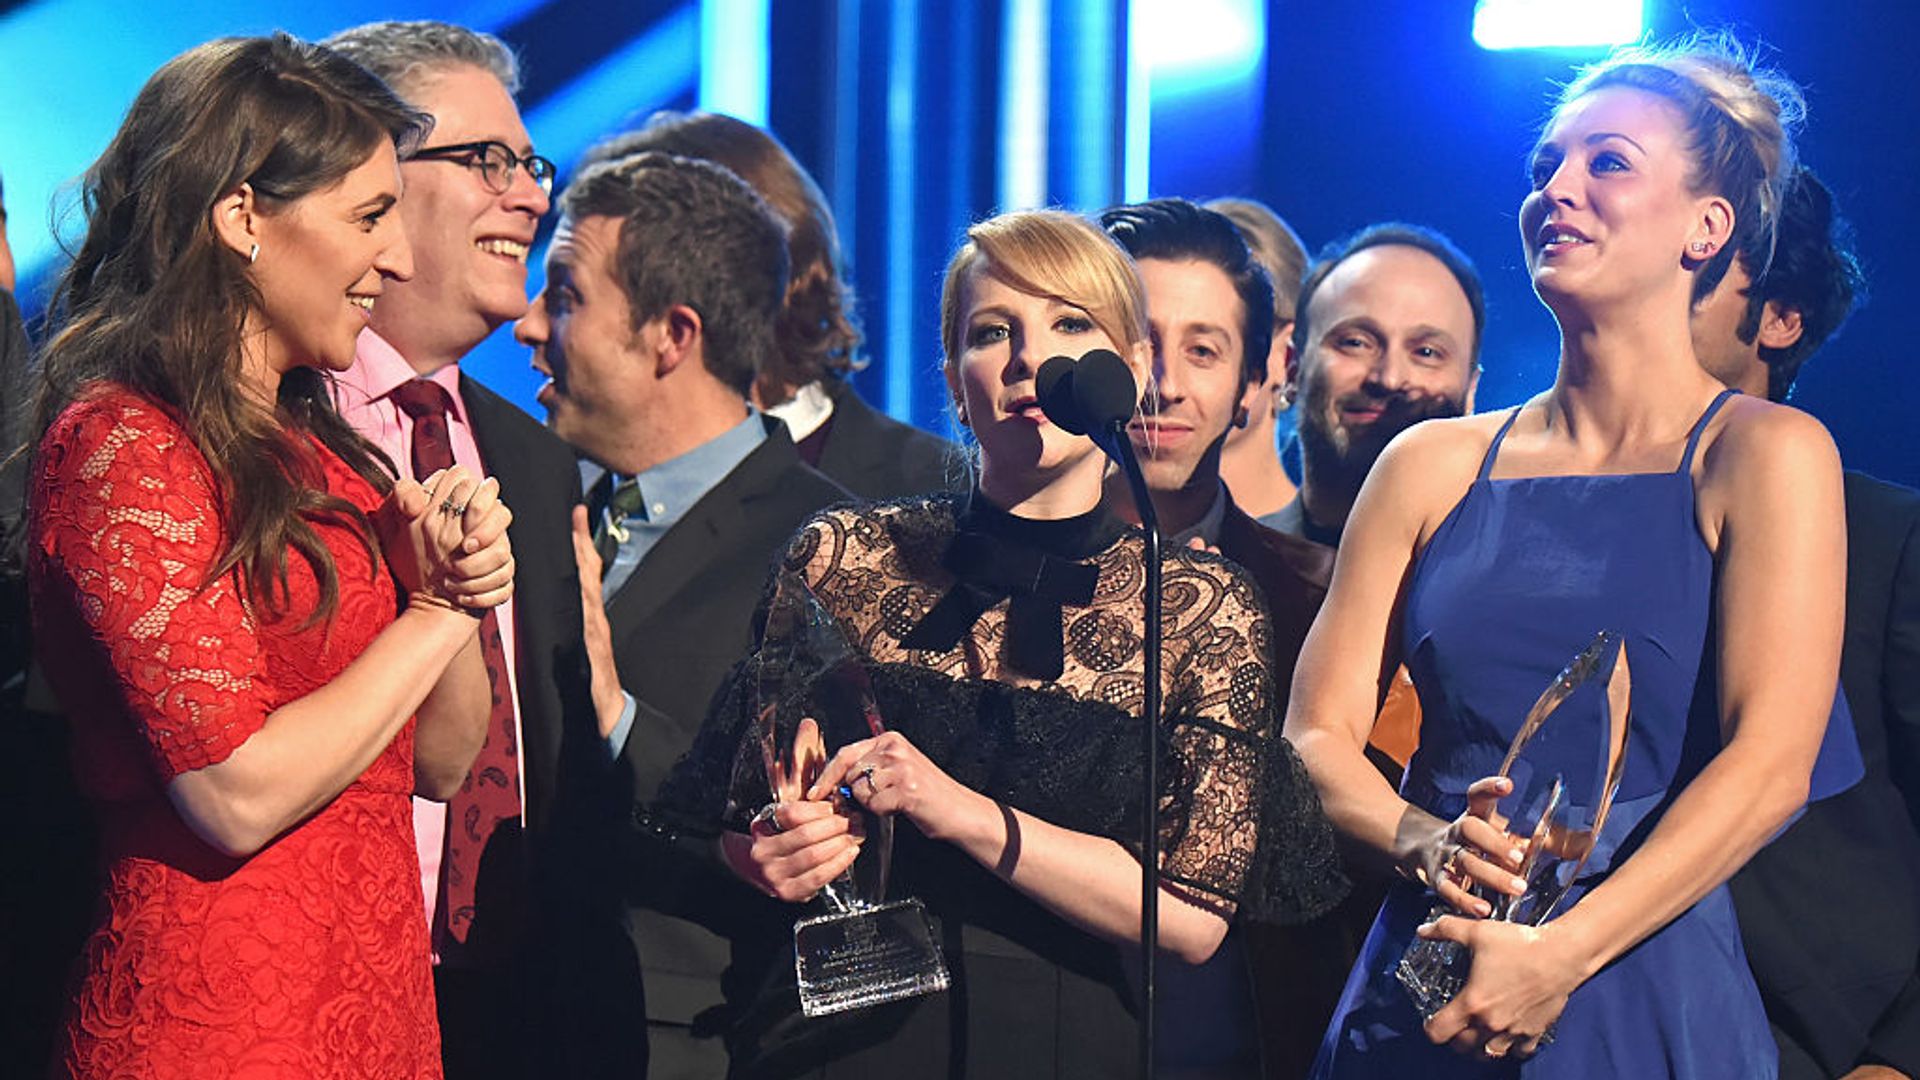 The cast and crew of 'The Big Bang Theory' accept an award onstage during the People's Choice Awards 2017